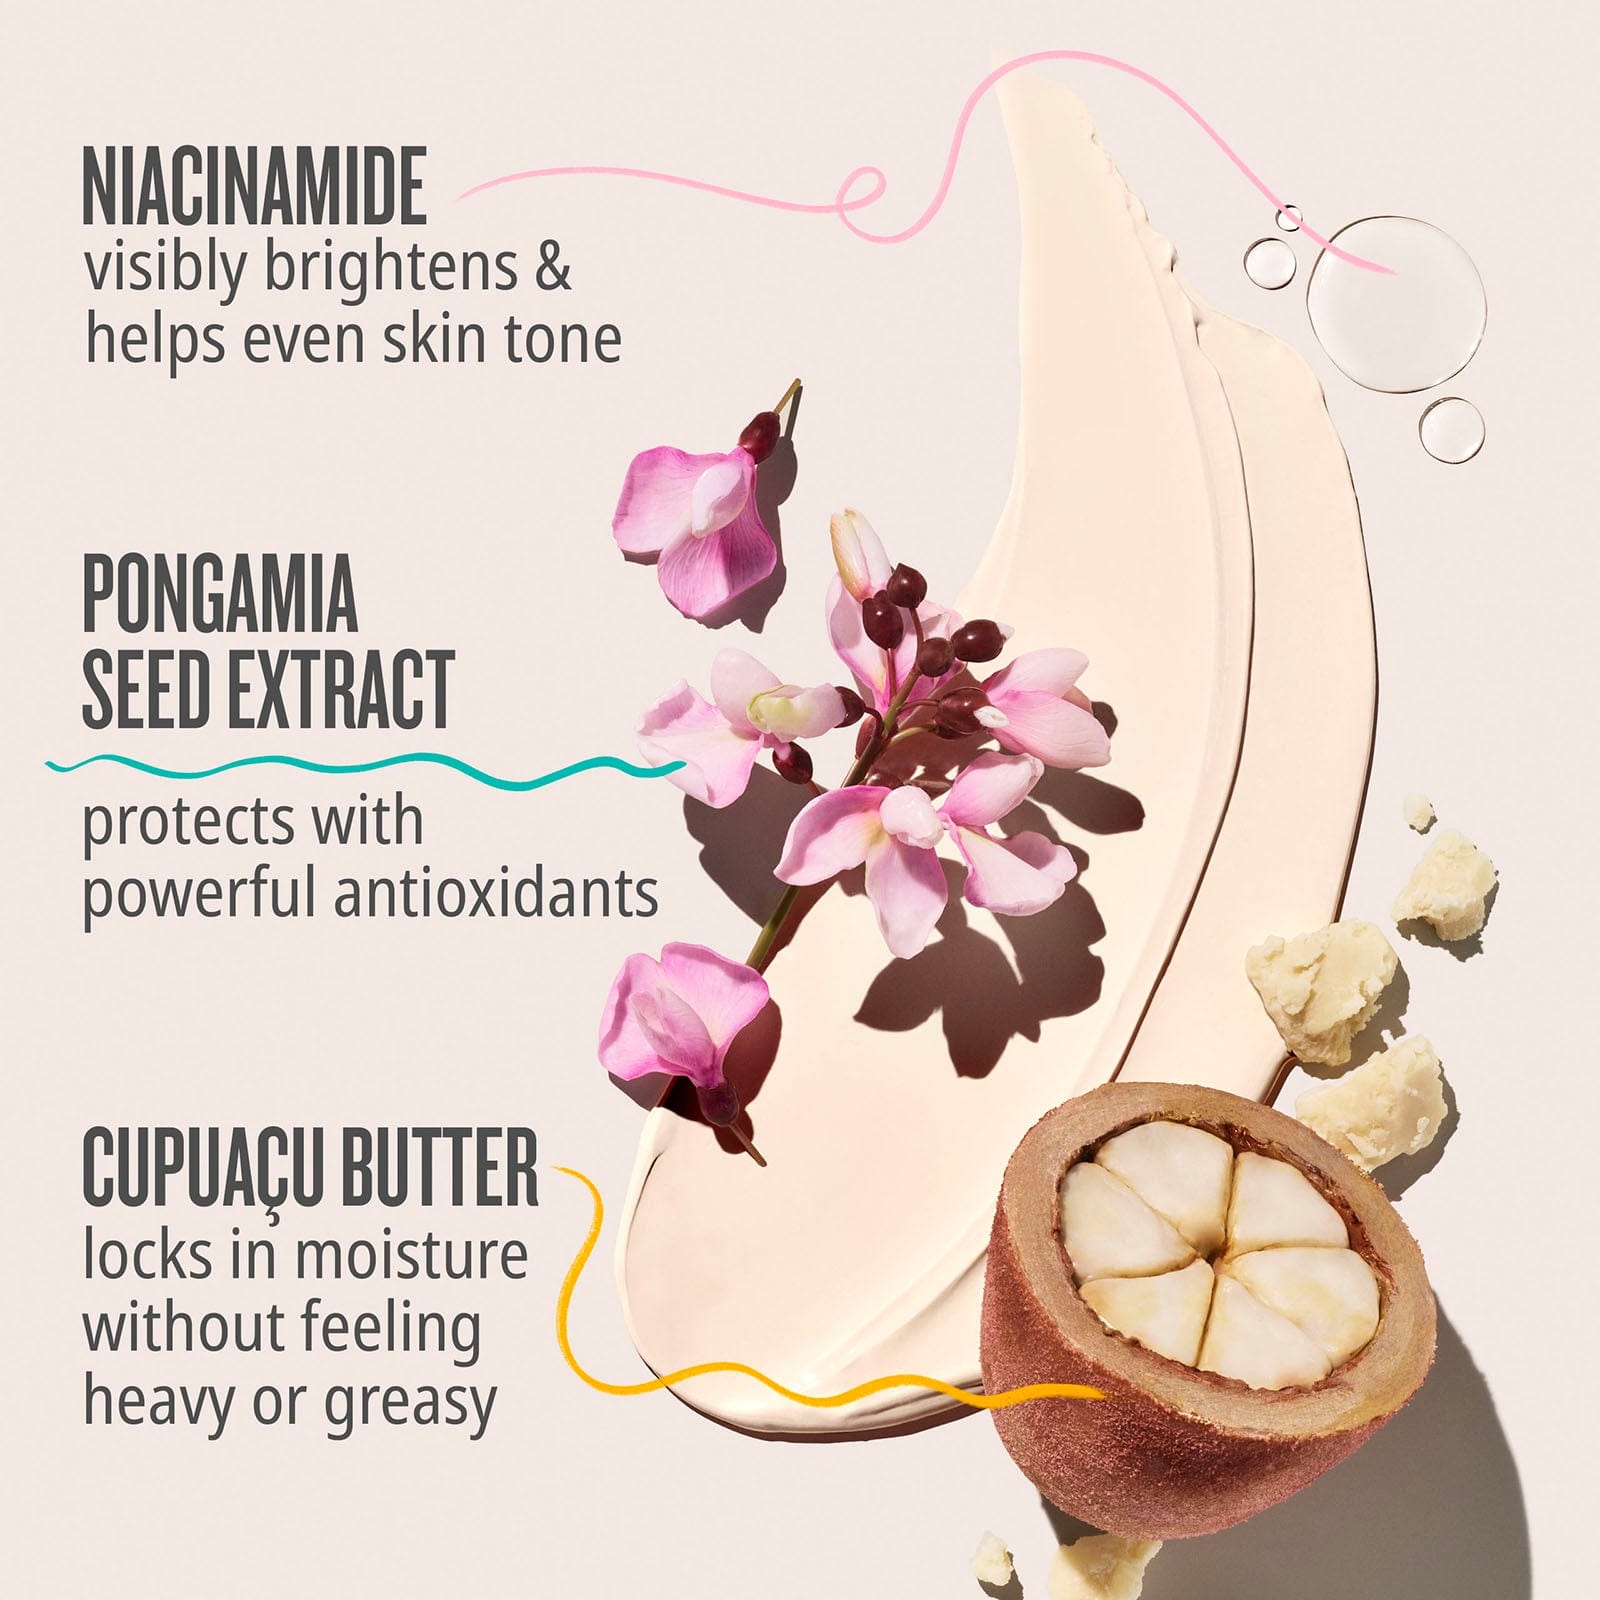 Niacinamide visibly brightens &amp; helps even skin tone. Pongamia seed extract protects with powerful antioxidants. Cupuacu butter locks in moisture without feeling heavy or greasy